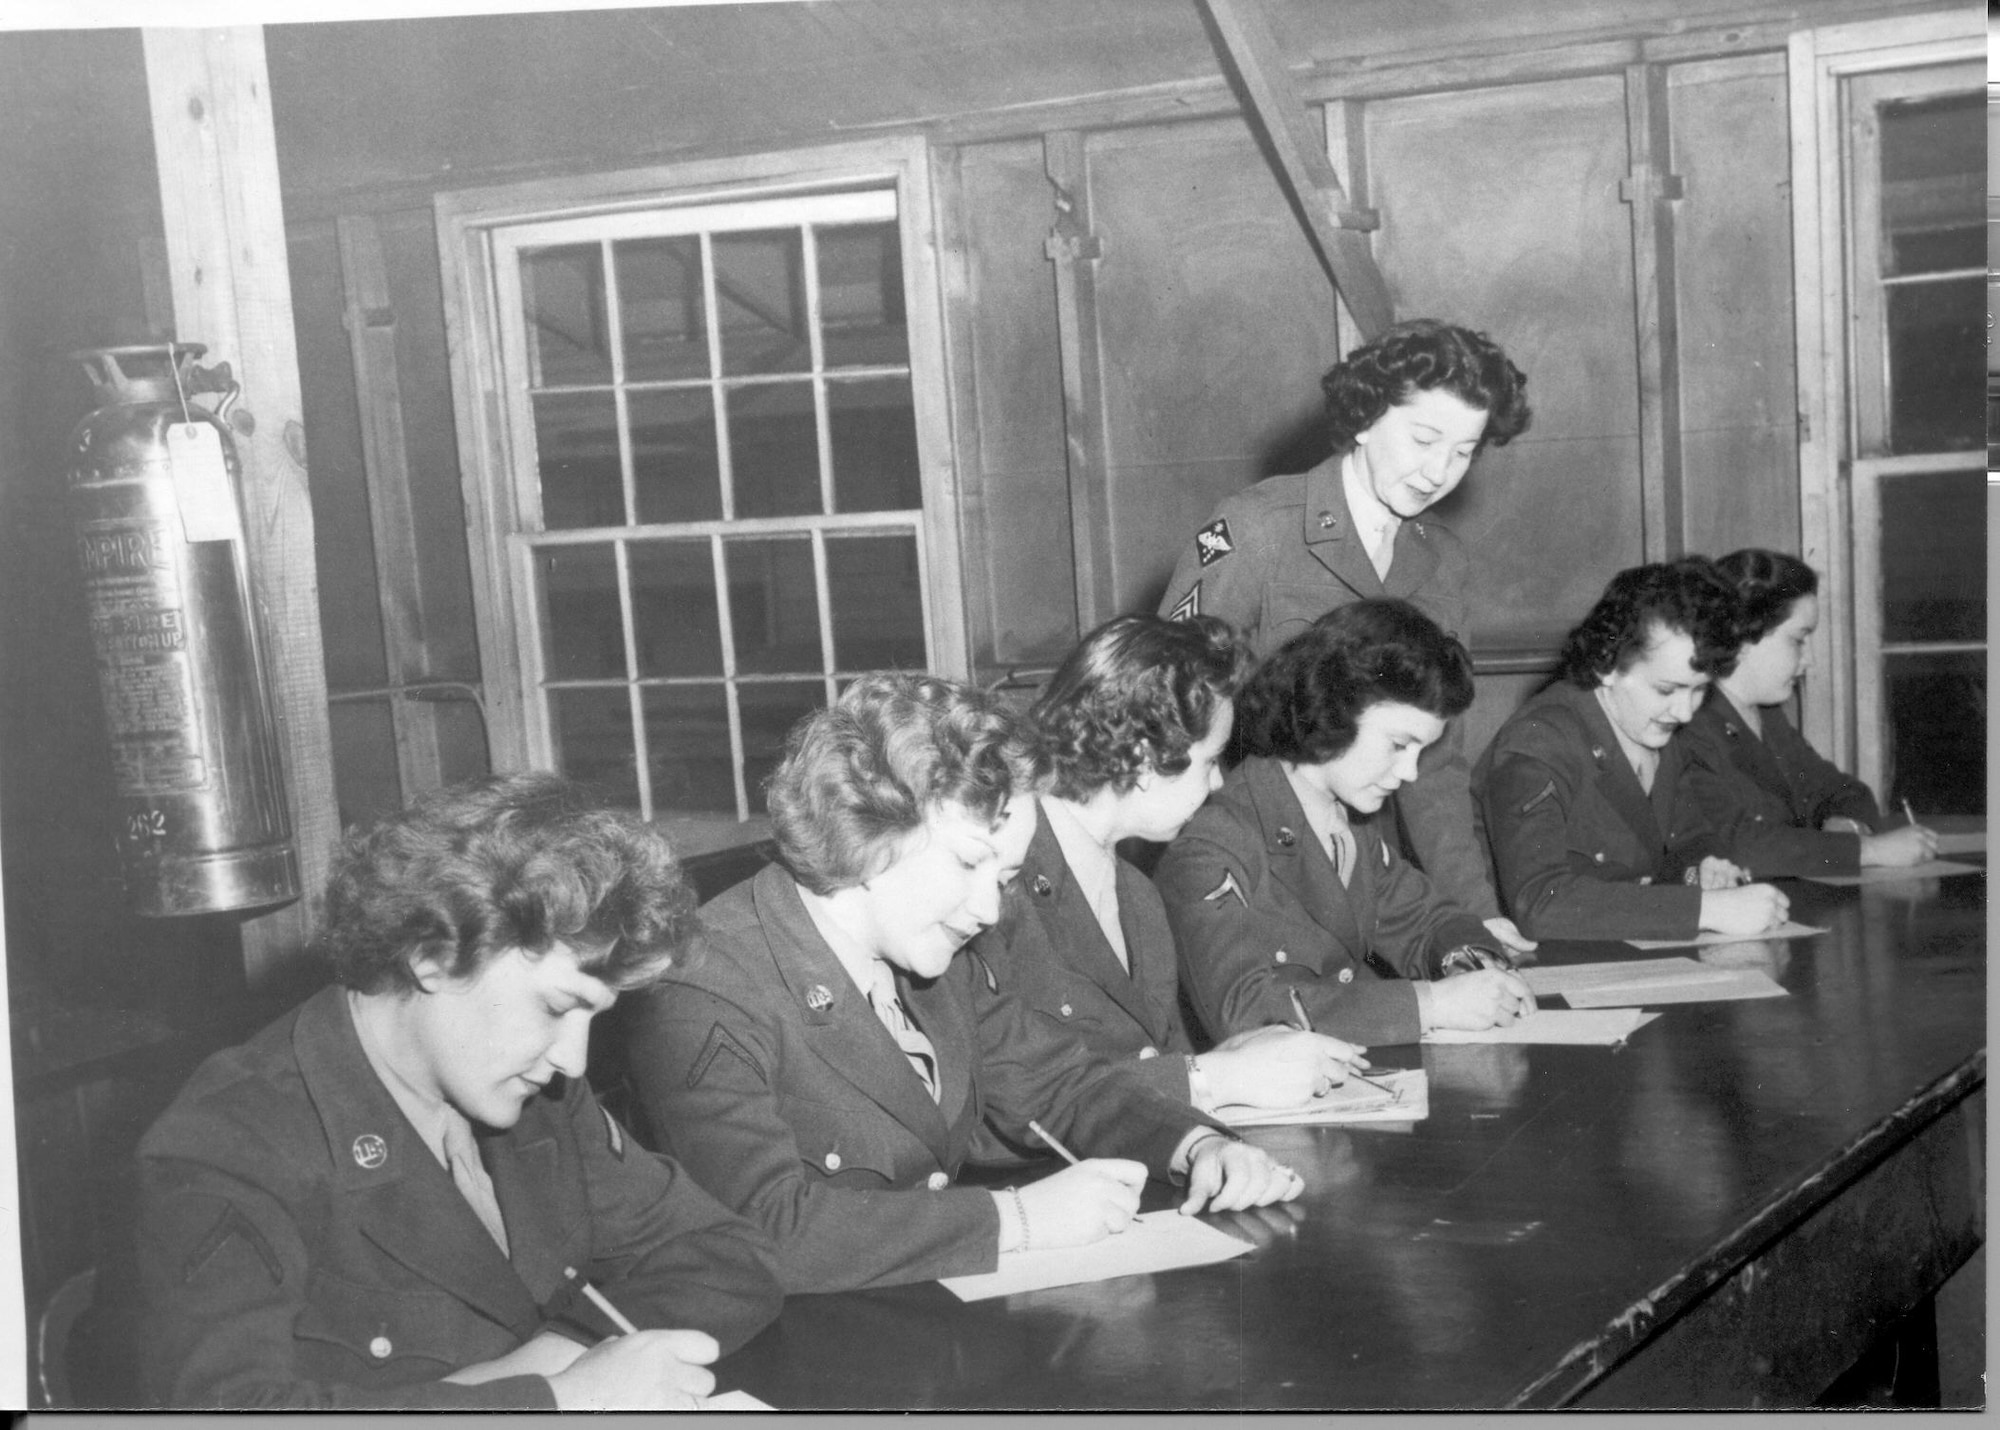 Women in the Air Force during Control Tower Training in the 1940s.